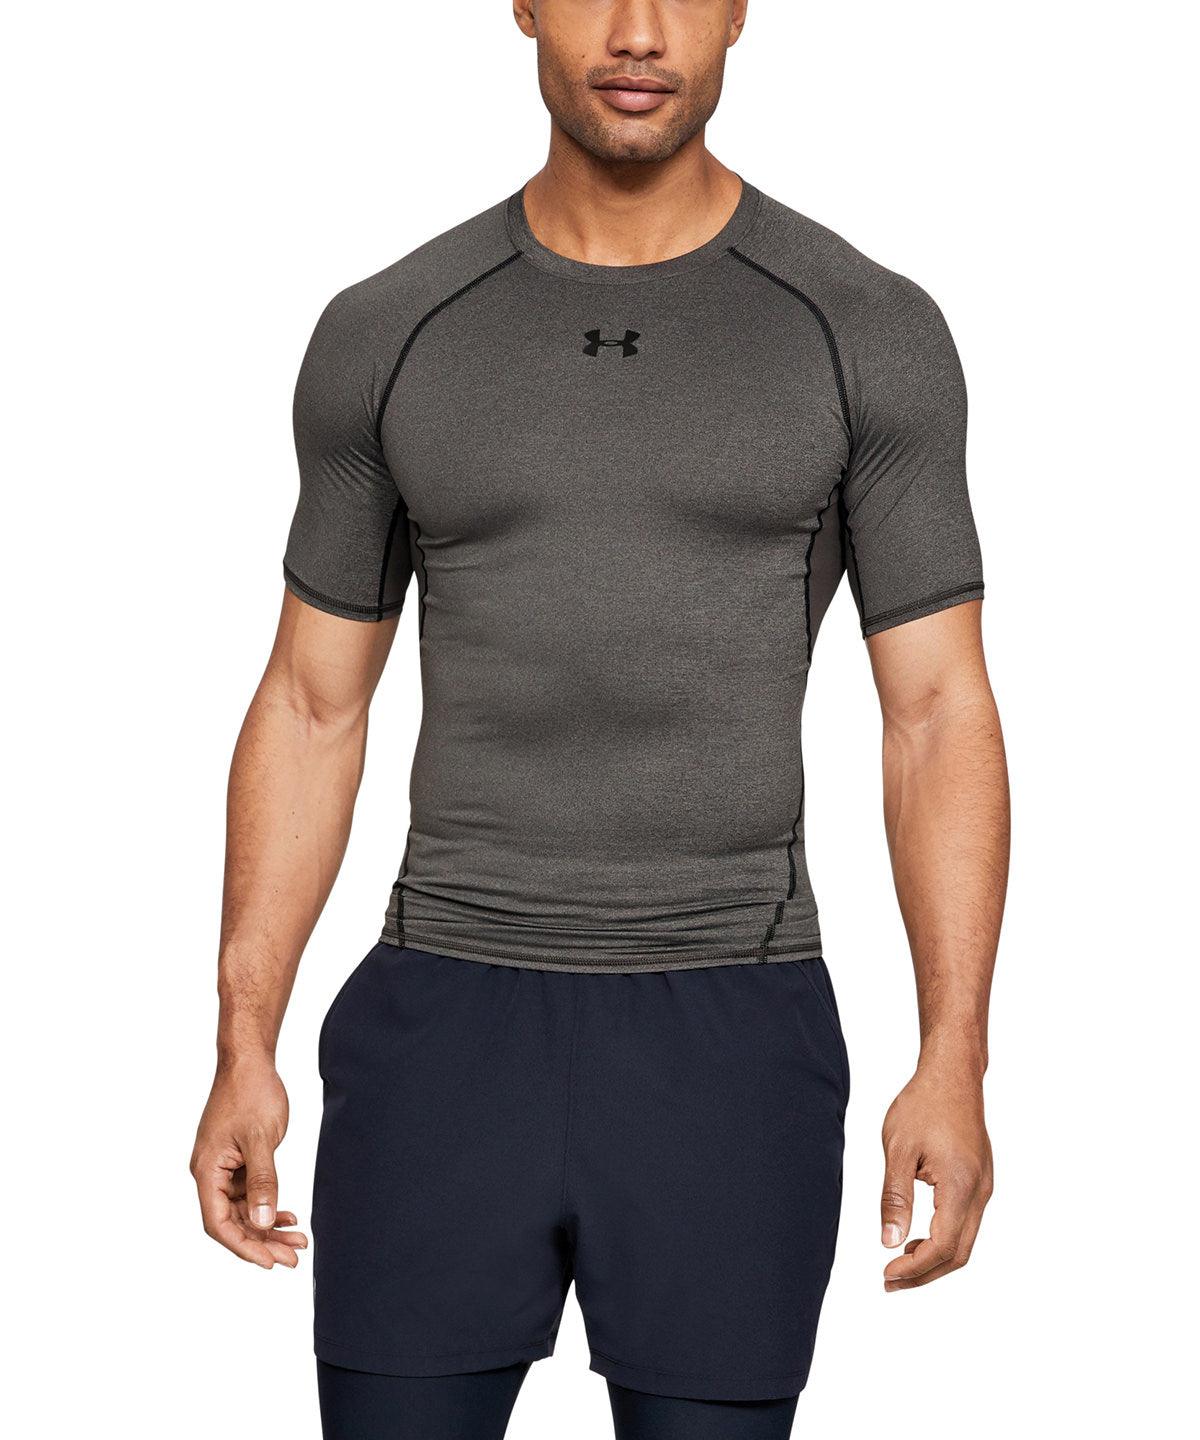 Black/Steel - HeatGear® Armour short sleeve compression shirt Baselayers Under Armour Activewear & Performance, Baselayers, Exclusives, New Colours for 2021, Premium, Premium Sports, Sports & Leisure, Team Sportswear Schoolwear Centres